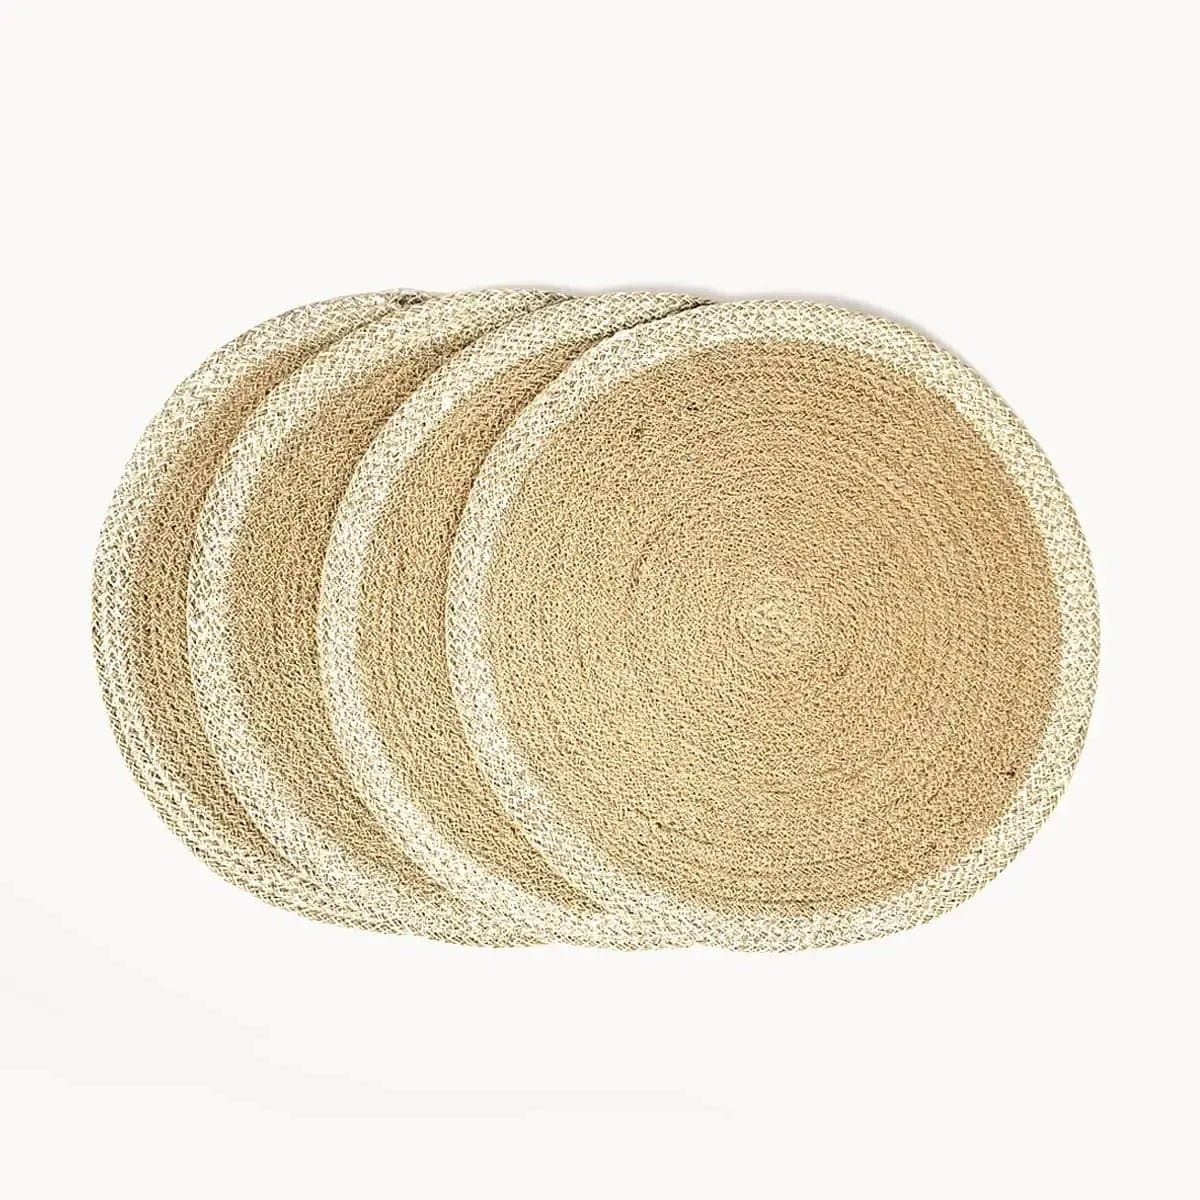 Handwoven Agora Placemat-Set of 4 - Mindful Living Home